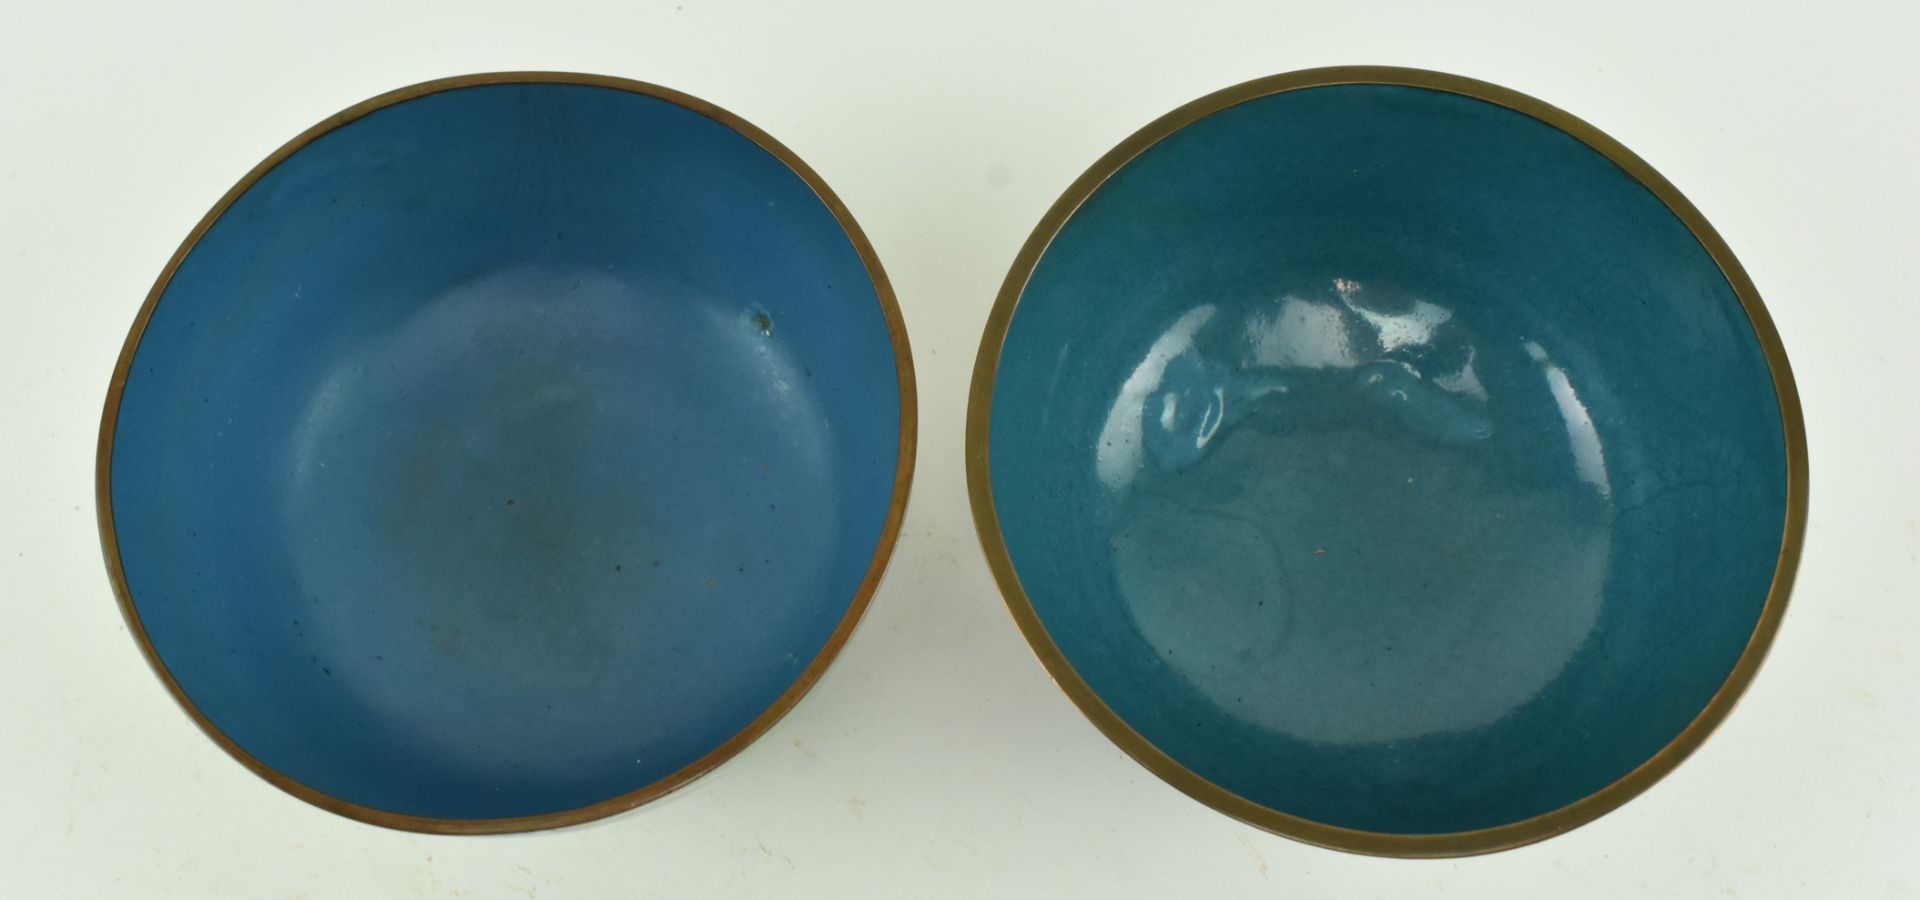 COLLECTION OF 21 CHINESE CLOISONNE BOWLS AND SAUCERS - Image 6 of 8